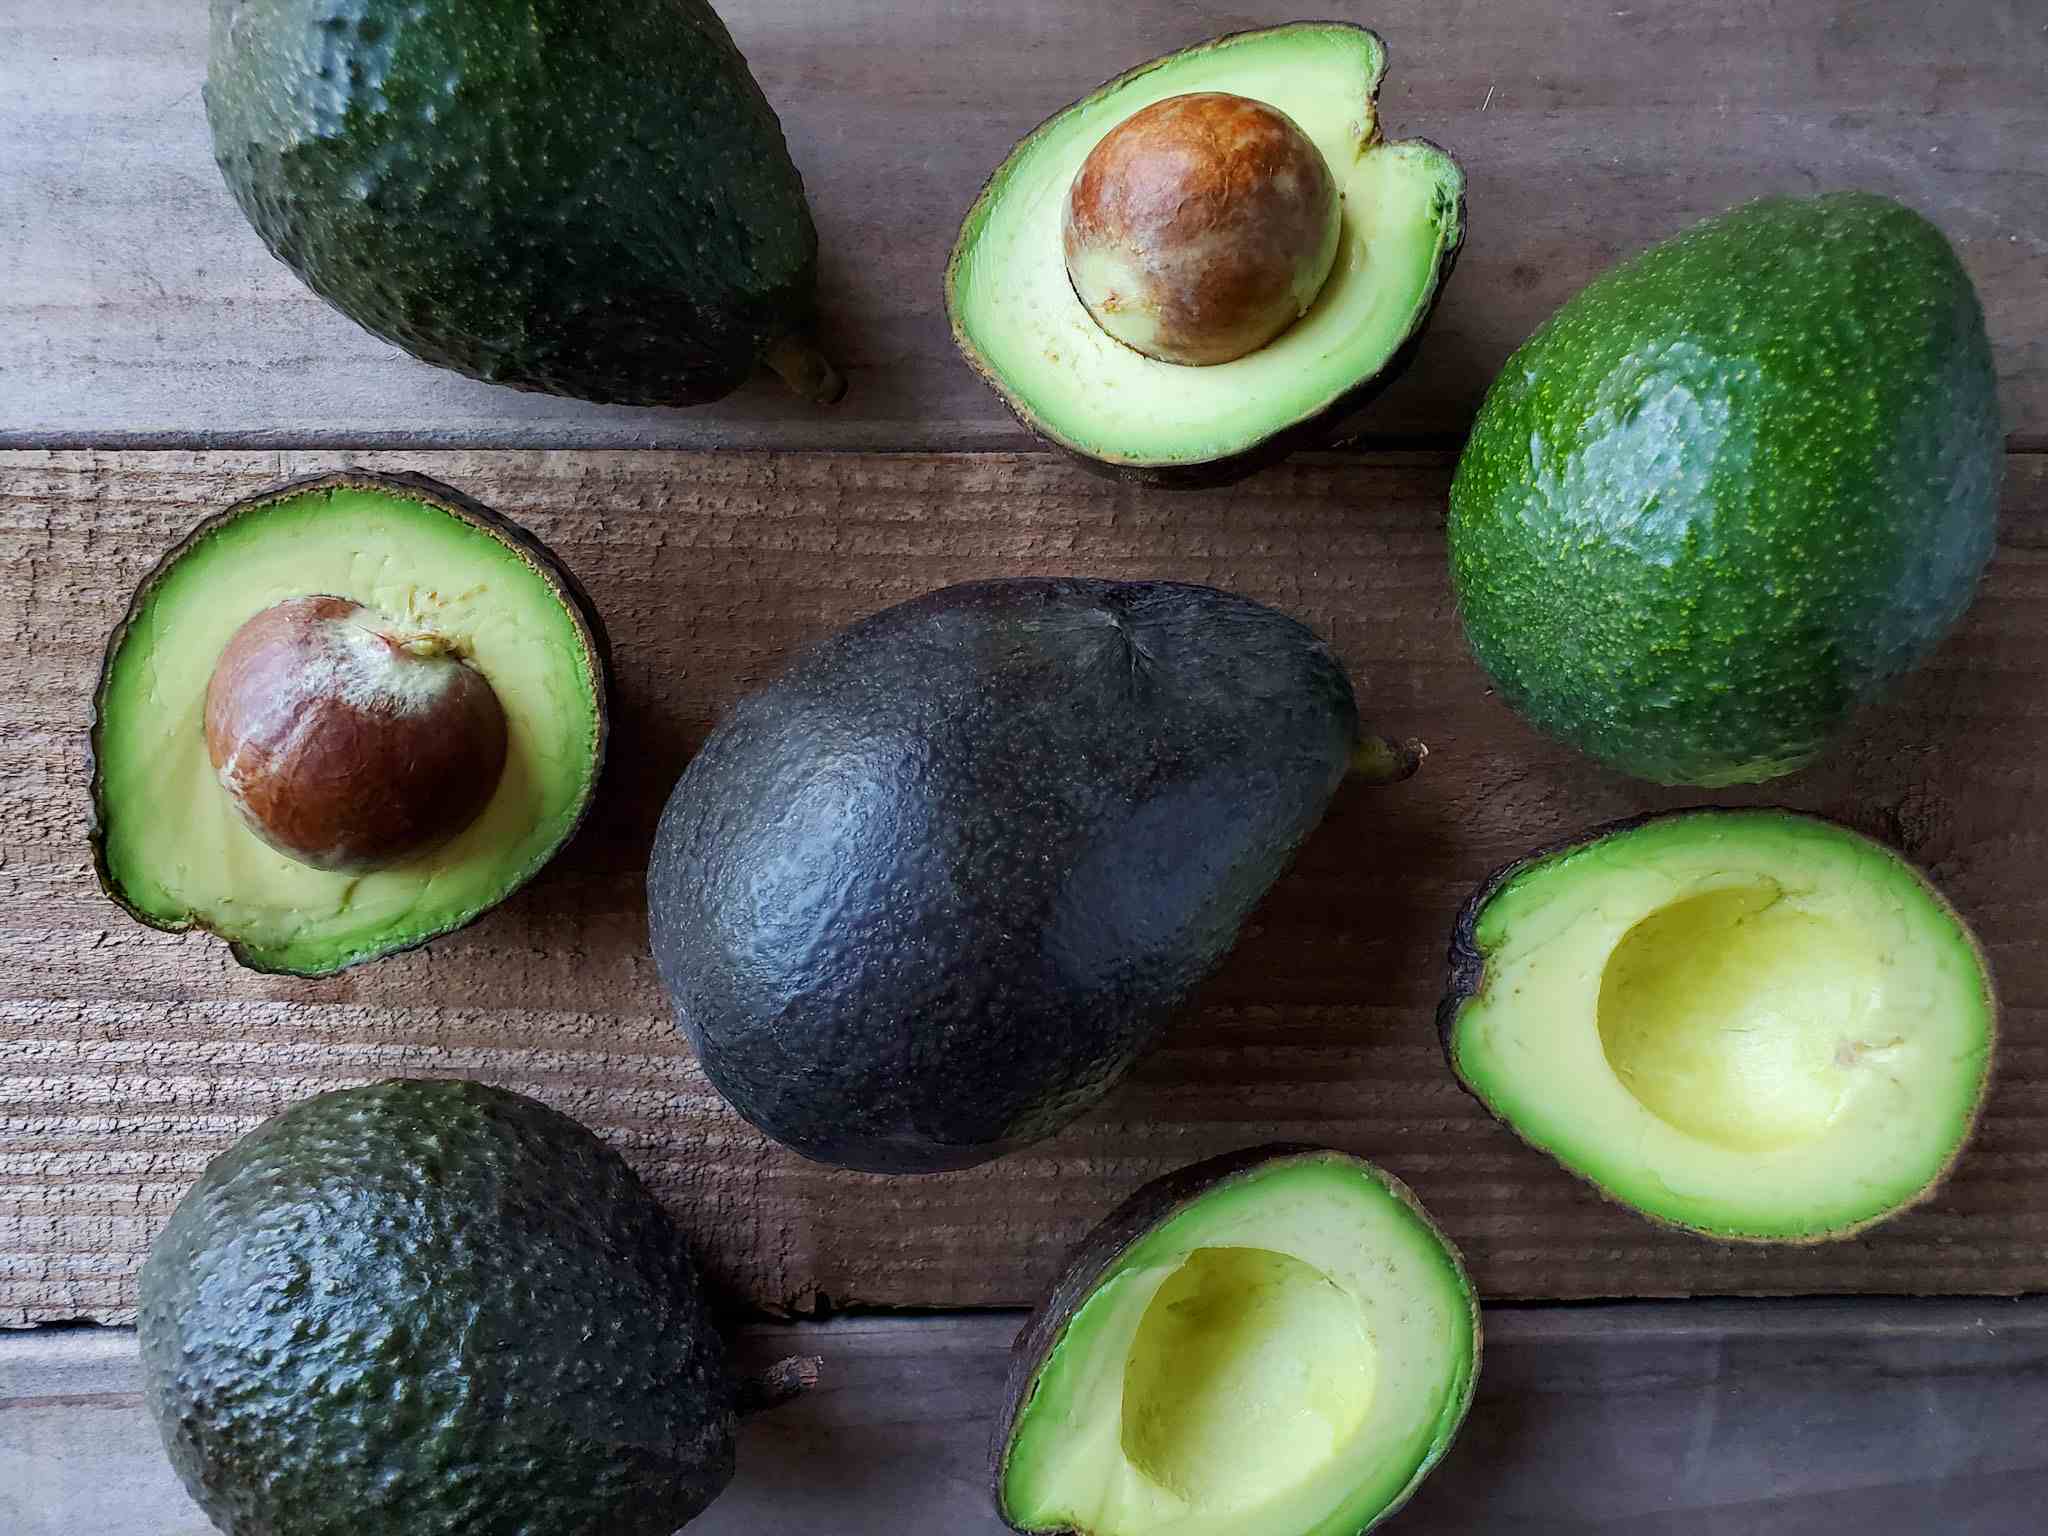 A number of whole and halved avocados are arranged on a wooden board. They each are at a varying stage of ripeness, some green, some dark green, while a large ripe avocado that is black in color sits in the middle. The avocados that have been cut in half reveal their creamy green fruit within.